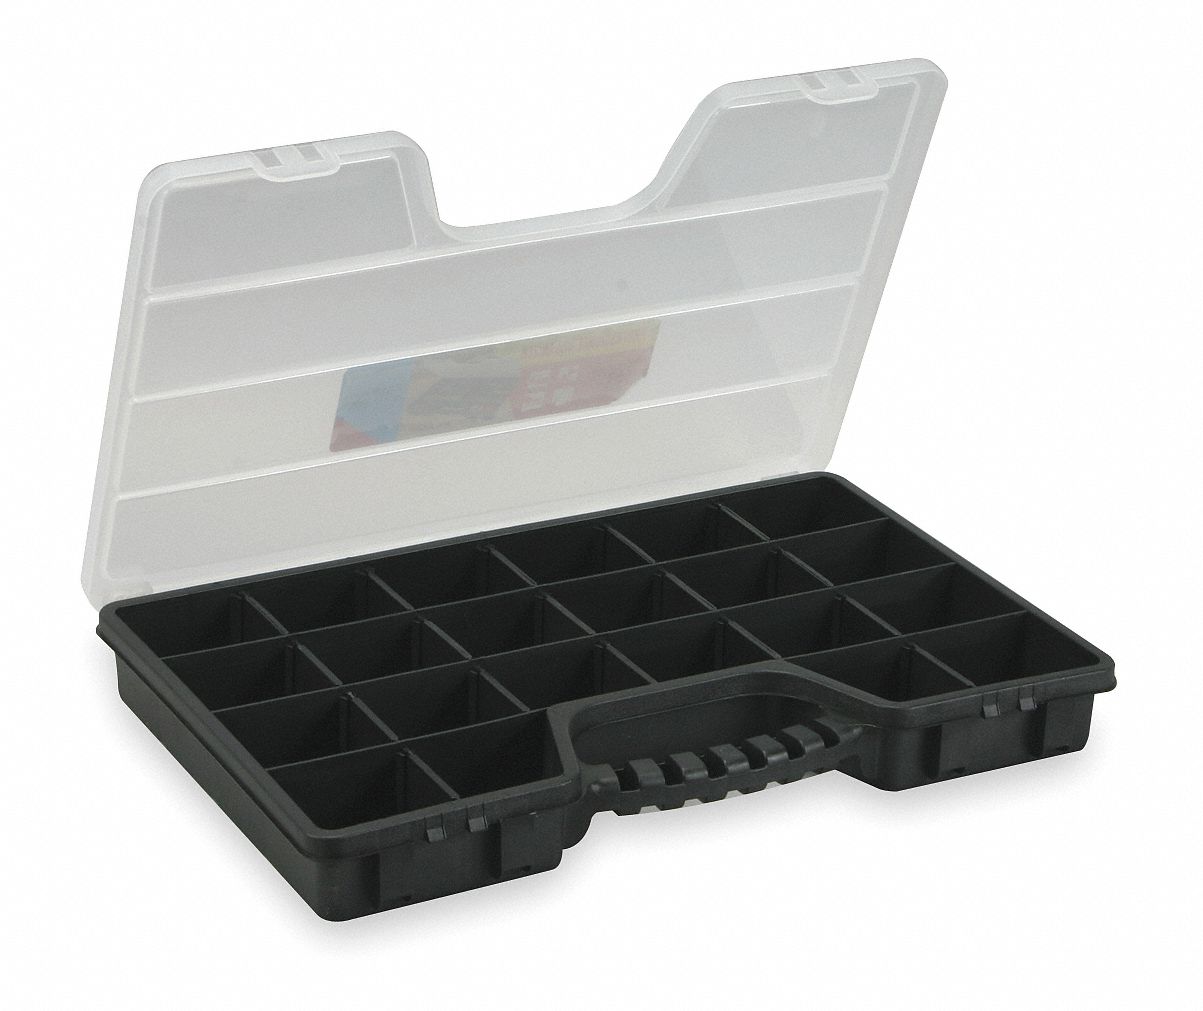 2HFR8 - Adjustable Box Compartments 5 to 22